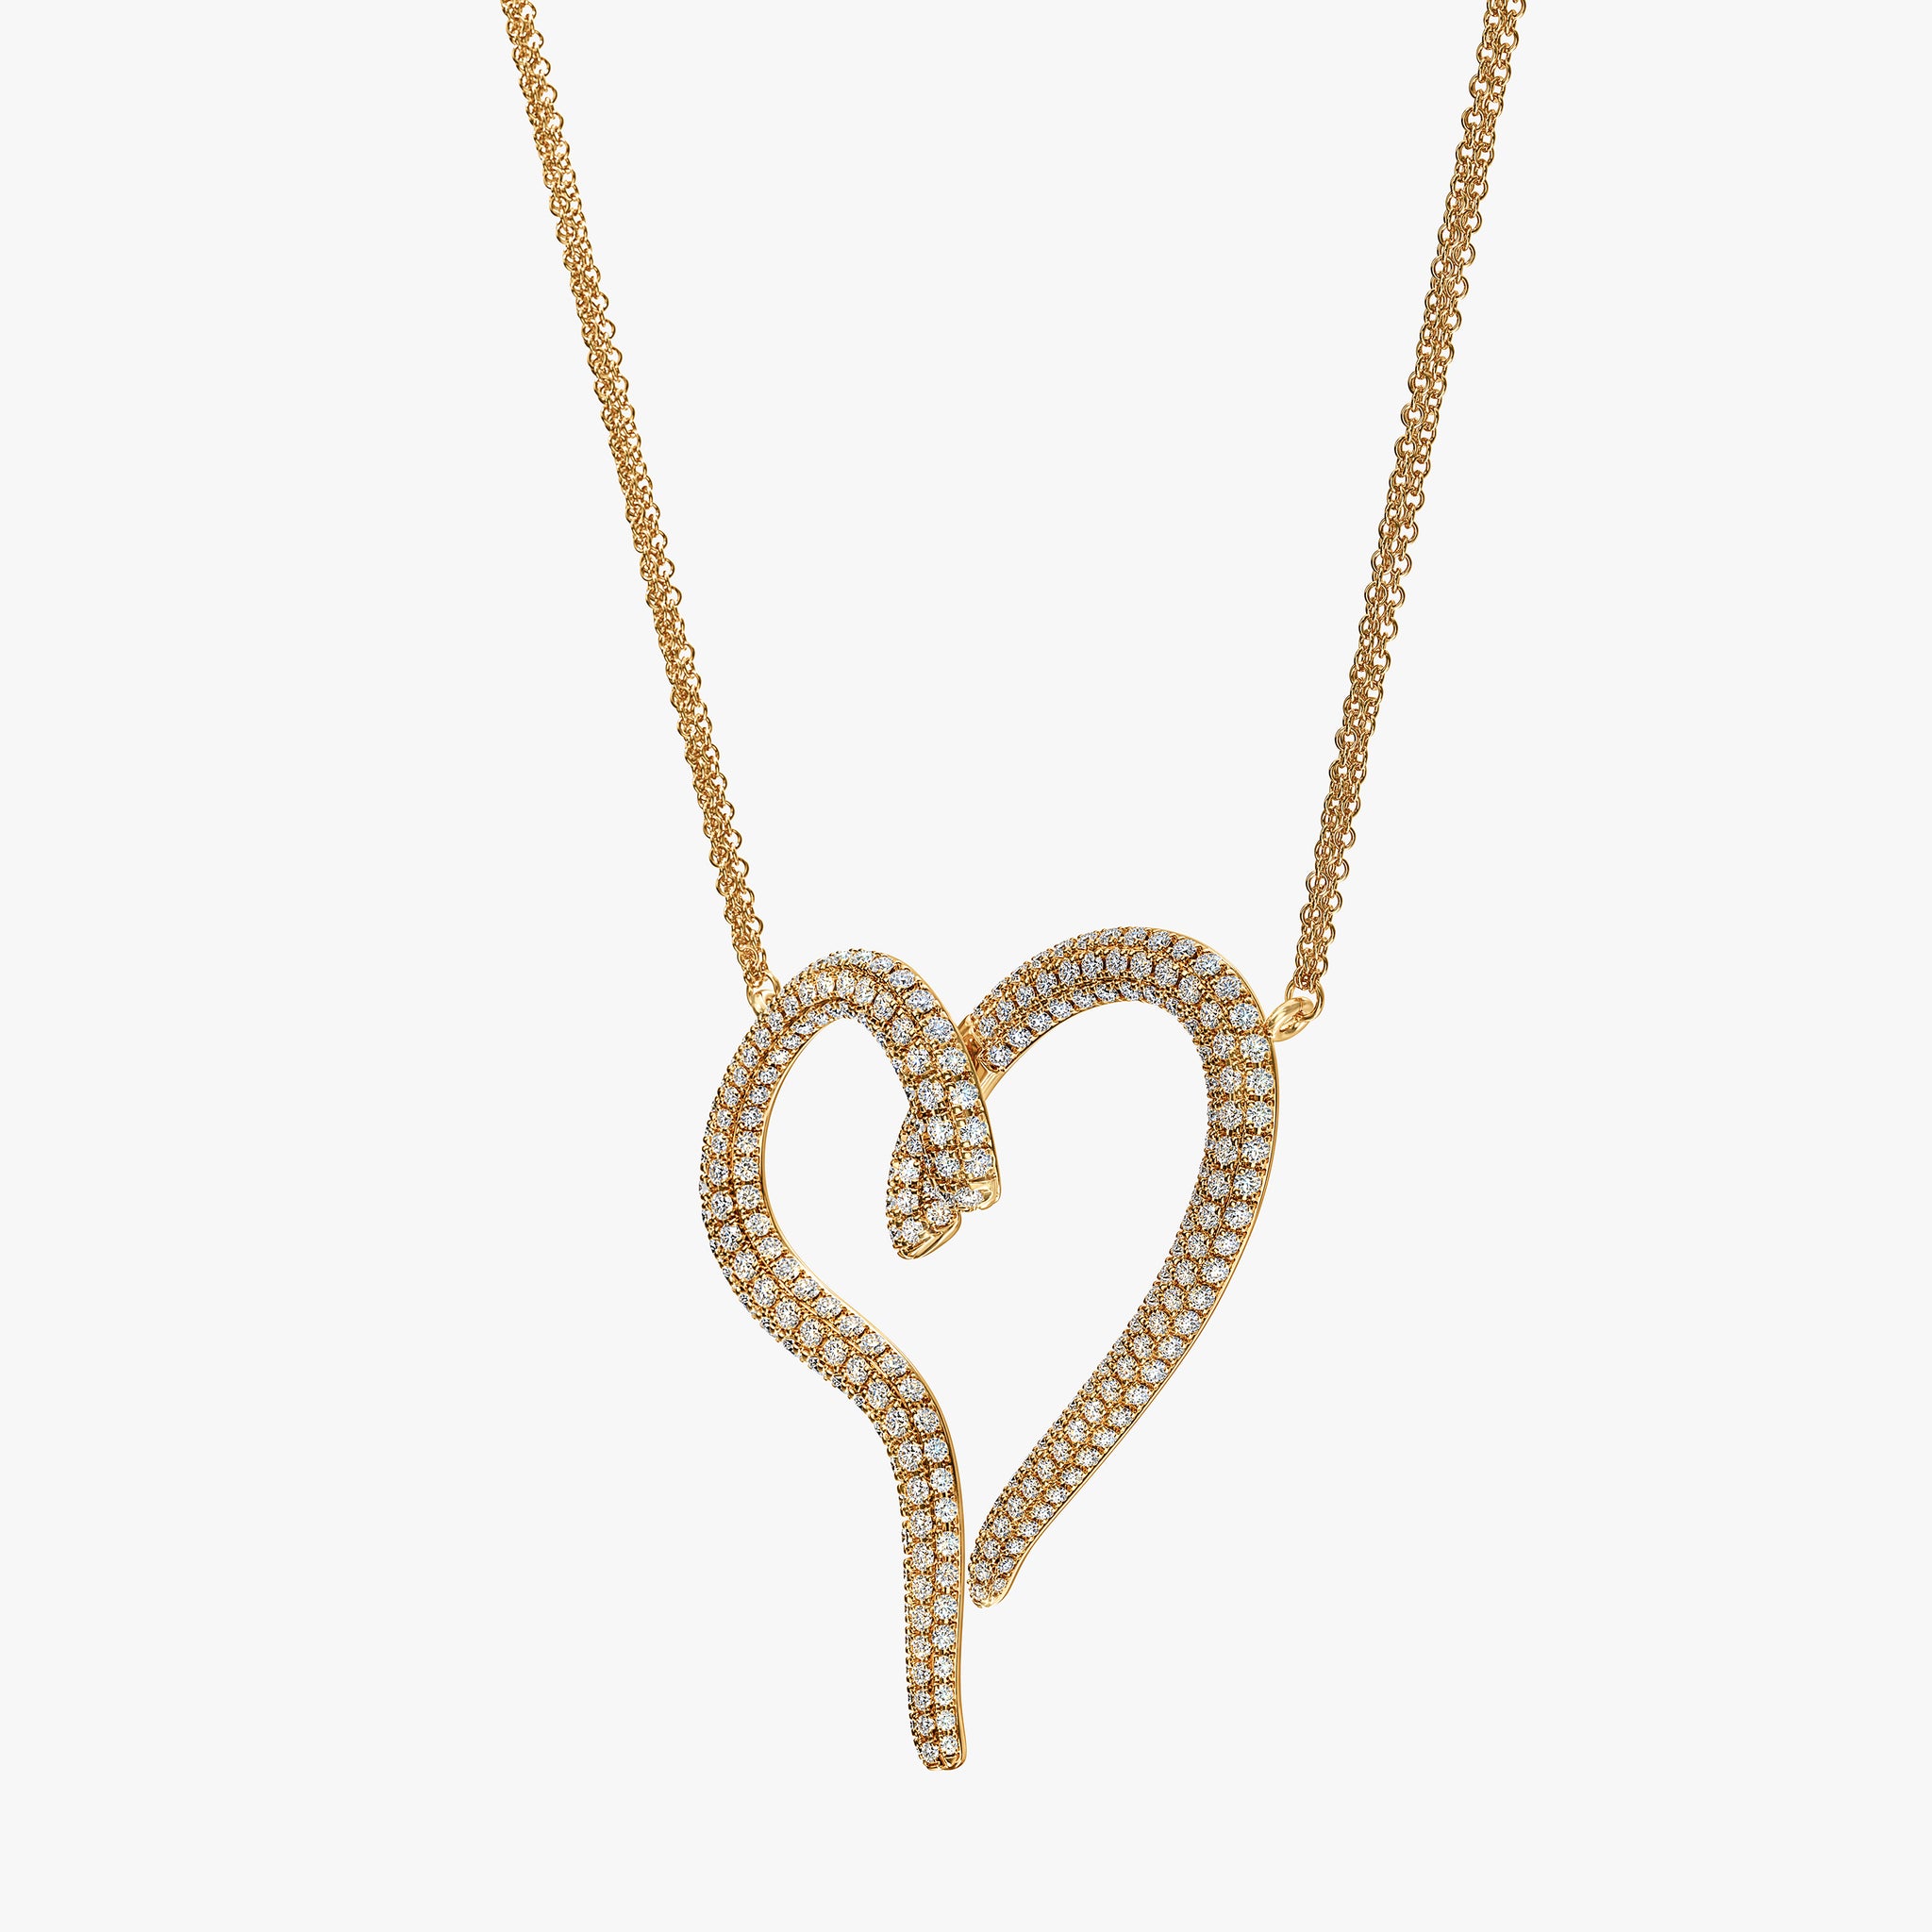 J'EVAR 14KT Yellow Gold Pave Heart ALTR Lab Grown Diamond Necklace Lock View